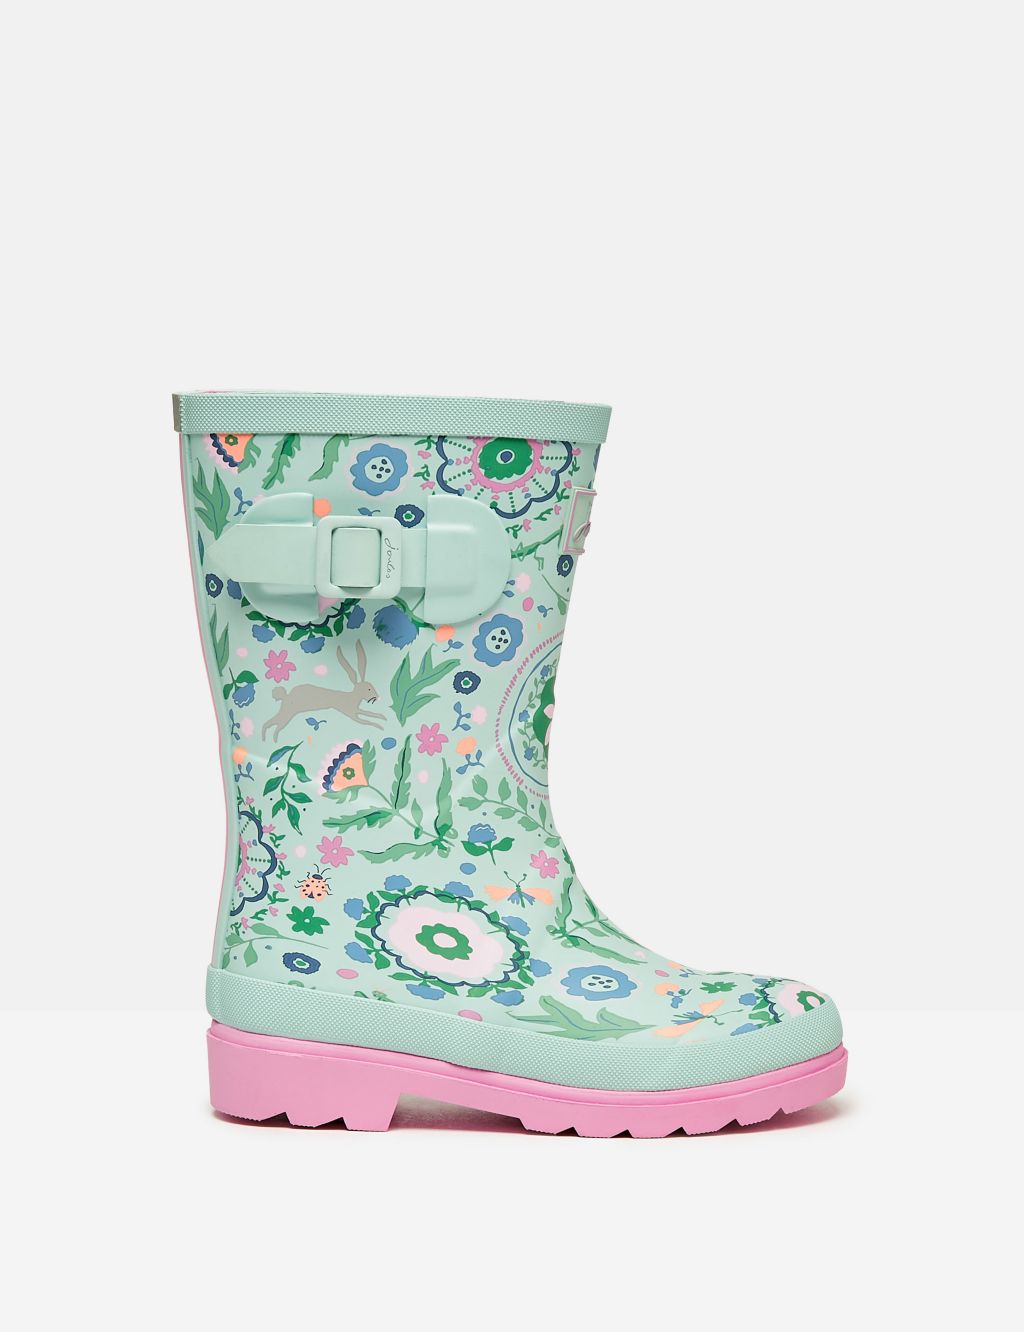 Printed Wellies (8 Small - 3 Large)